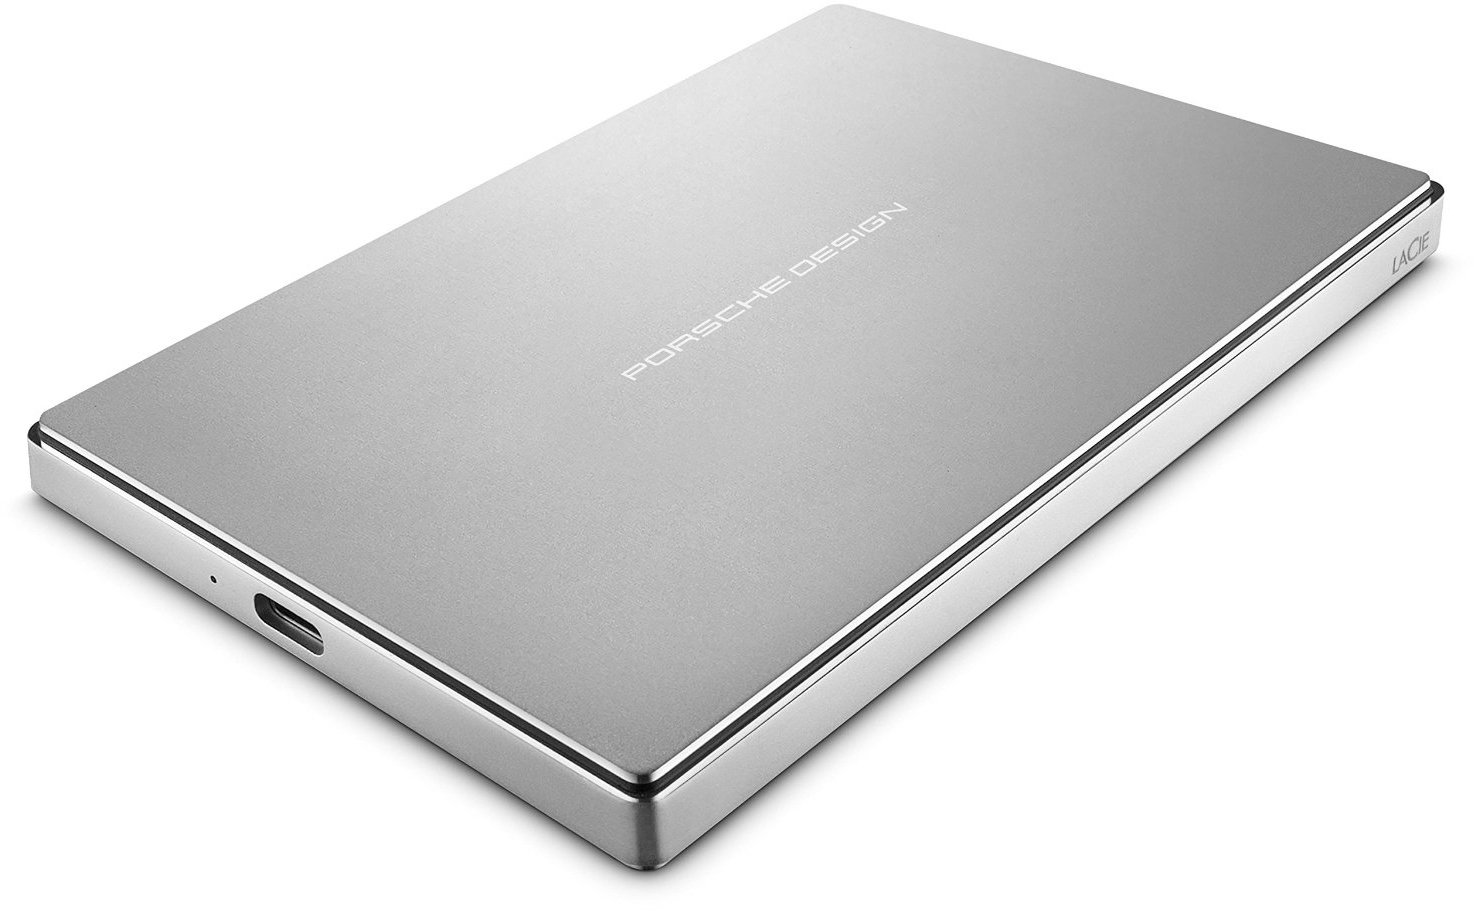 Best portable drive for mac